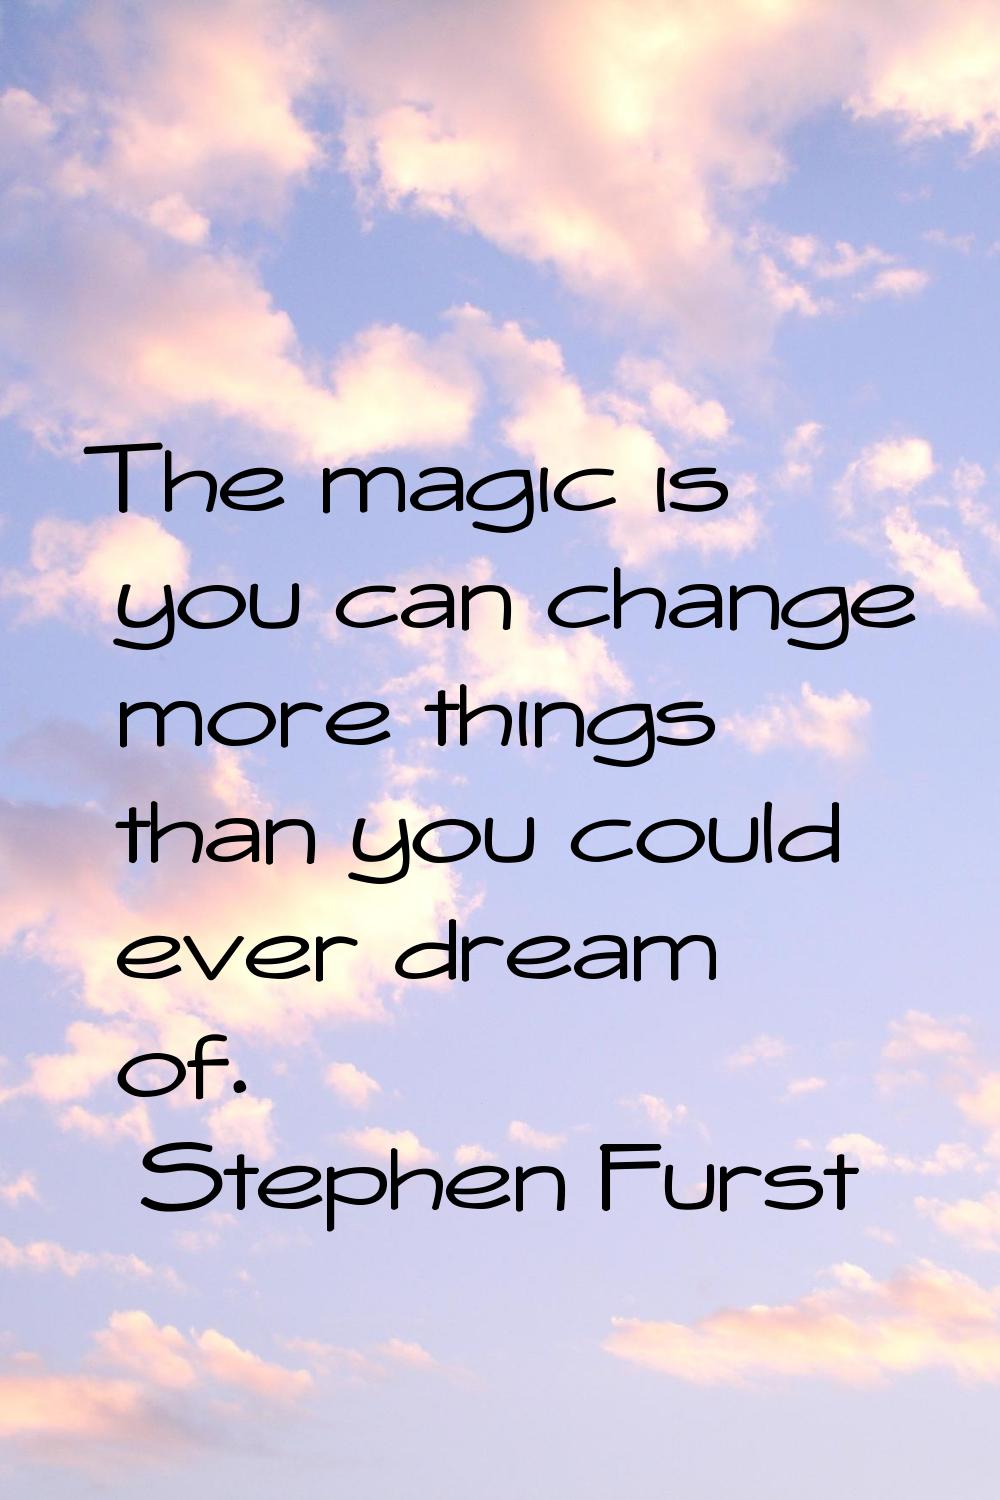 The magic is you can change more things than you could ever dream of.